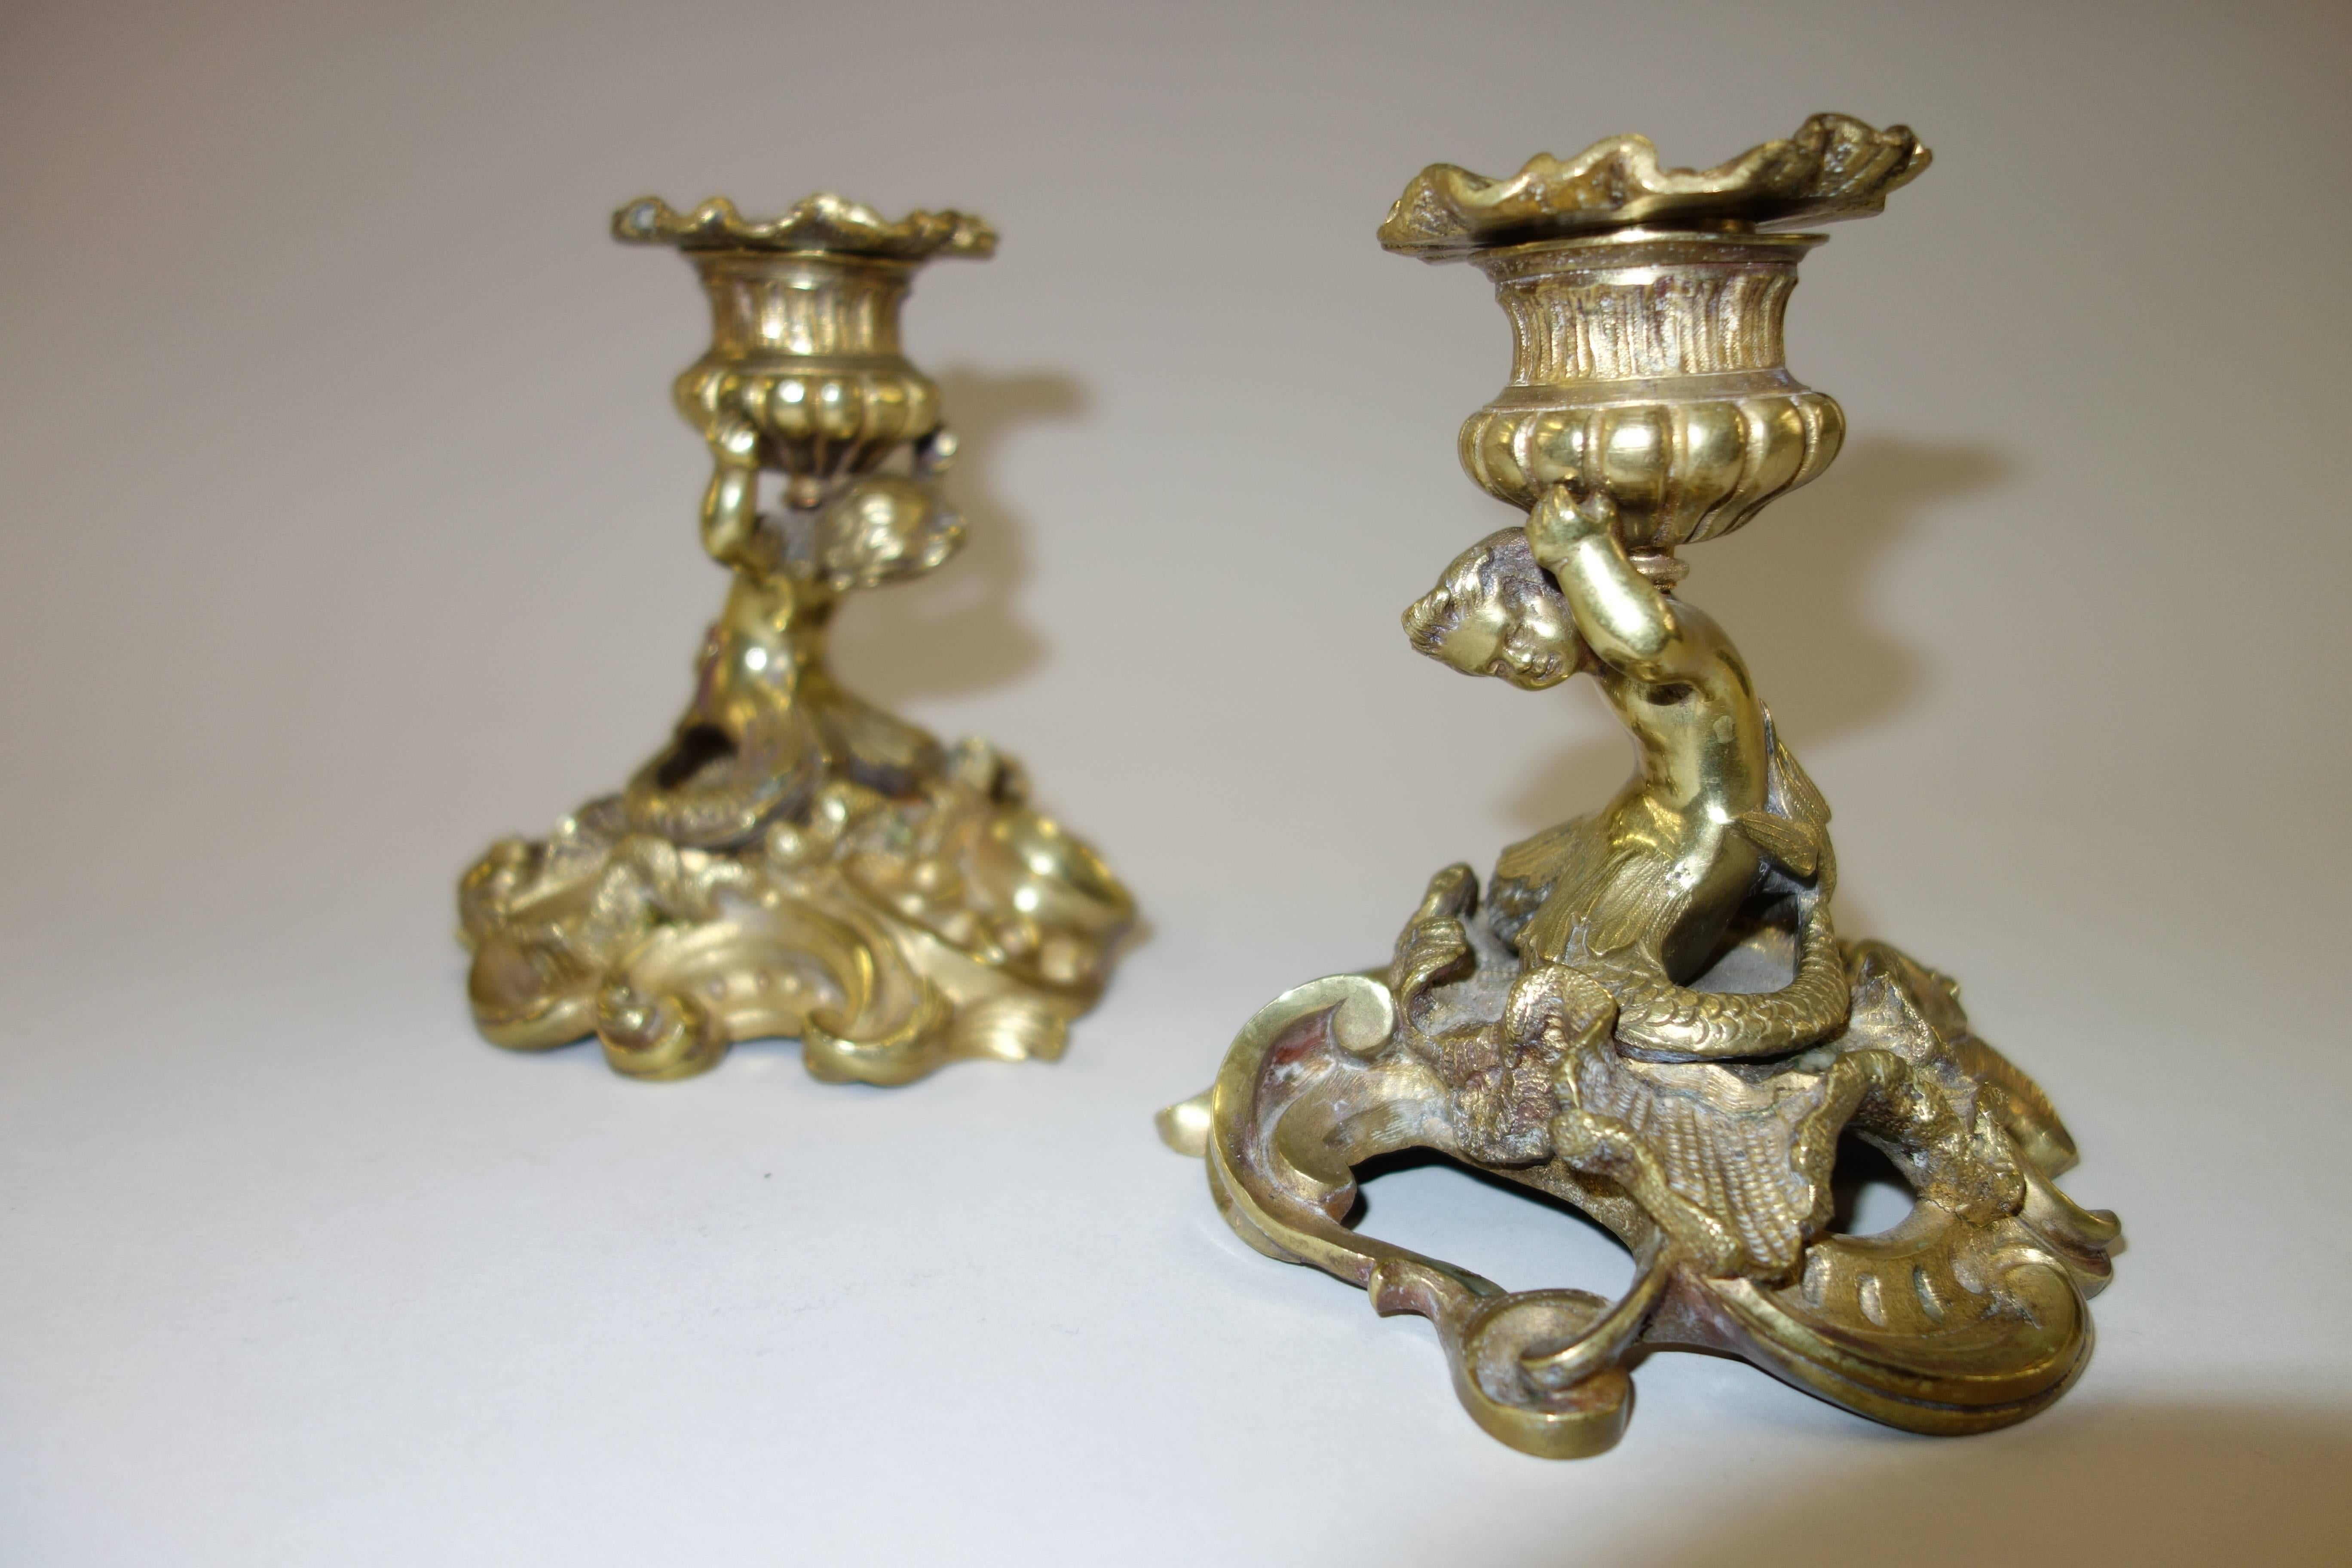 A pair of late 19th century Italian bronze candlesticks or candleholders comprised of mermaids situated on rock-like outcrop, shouldering fluted urn-shaped candleholders, foundry marks on the base.